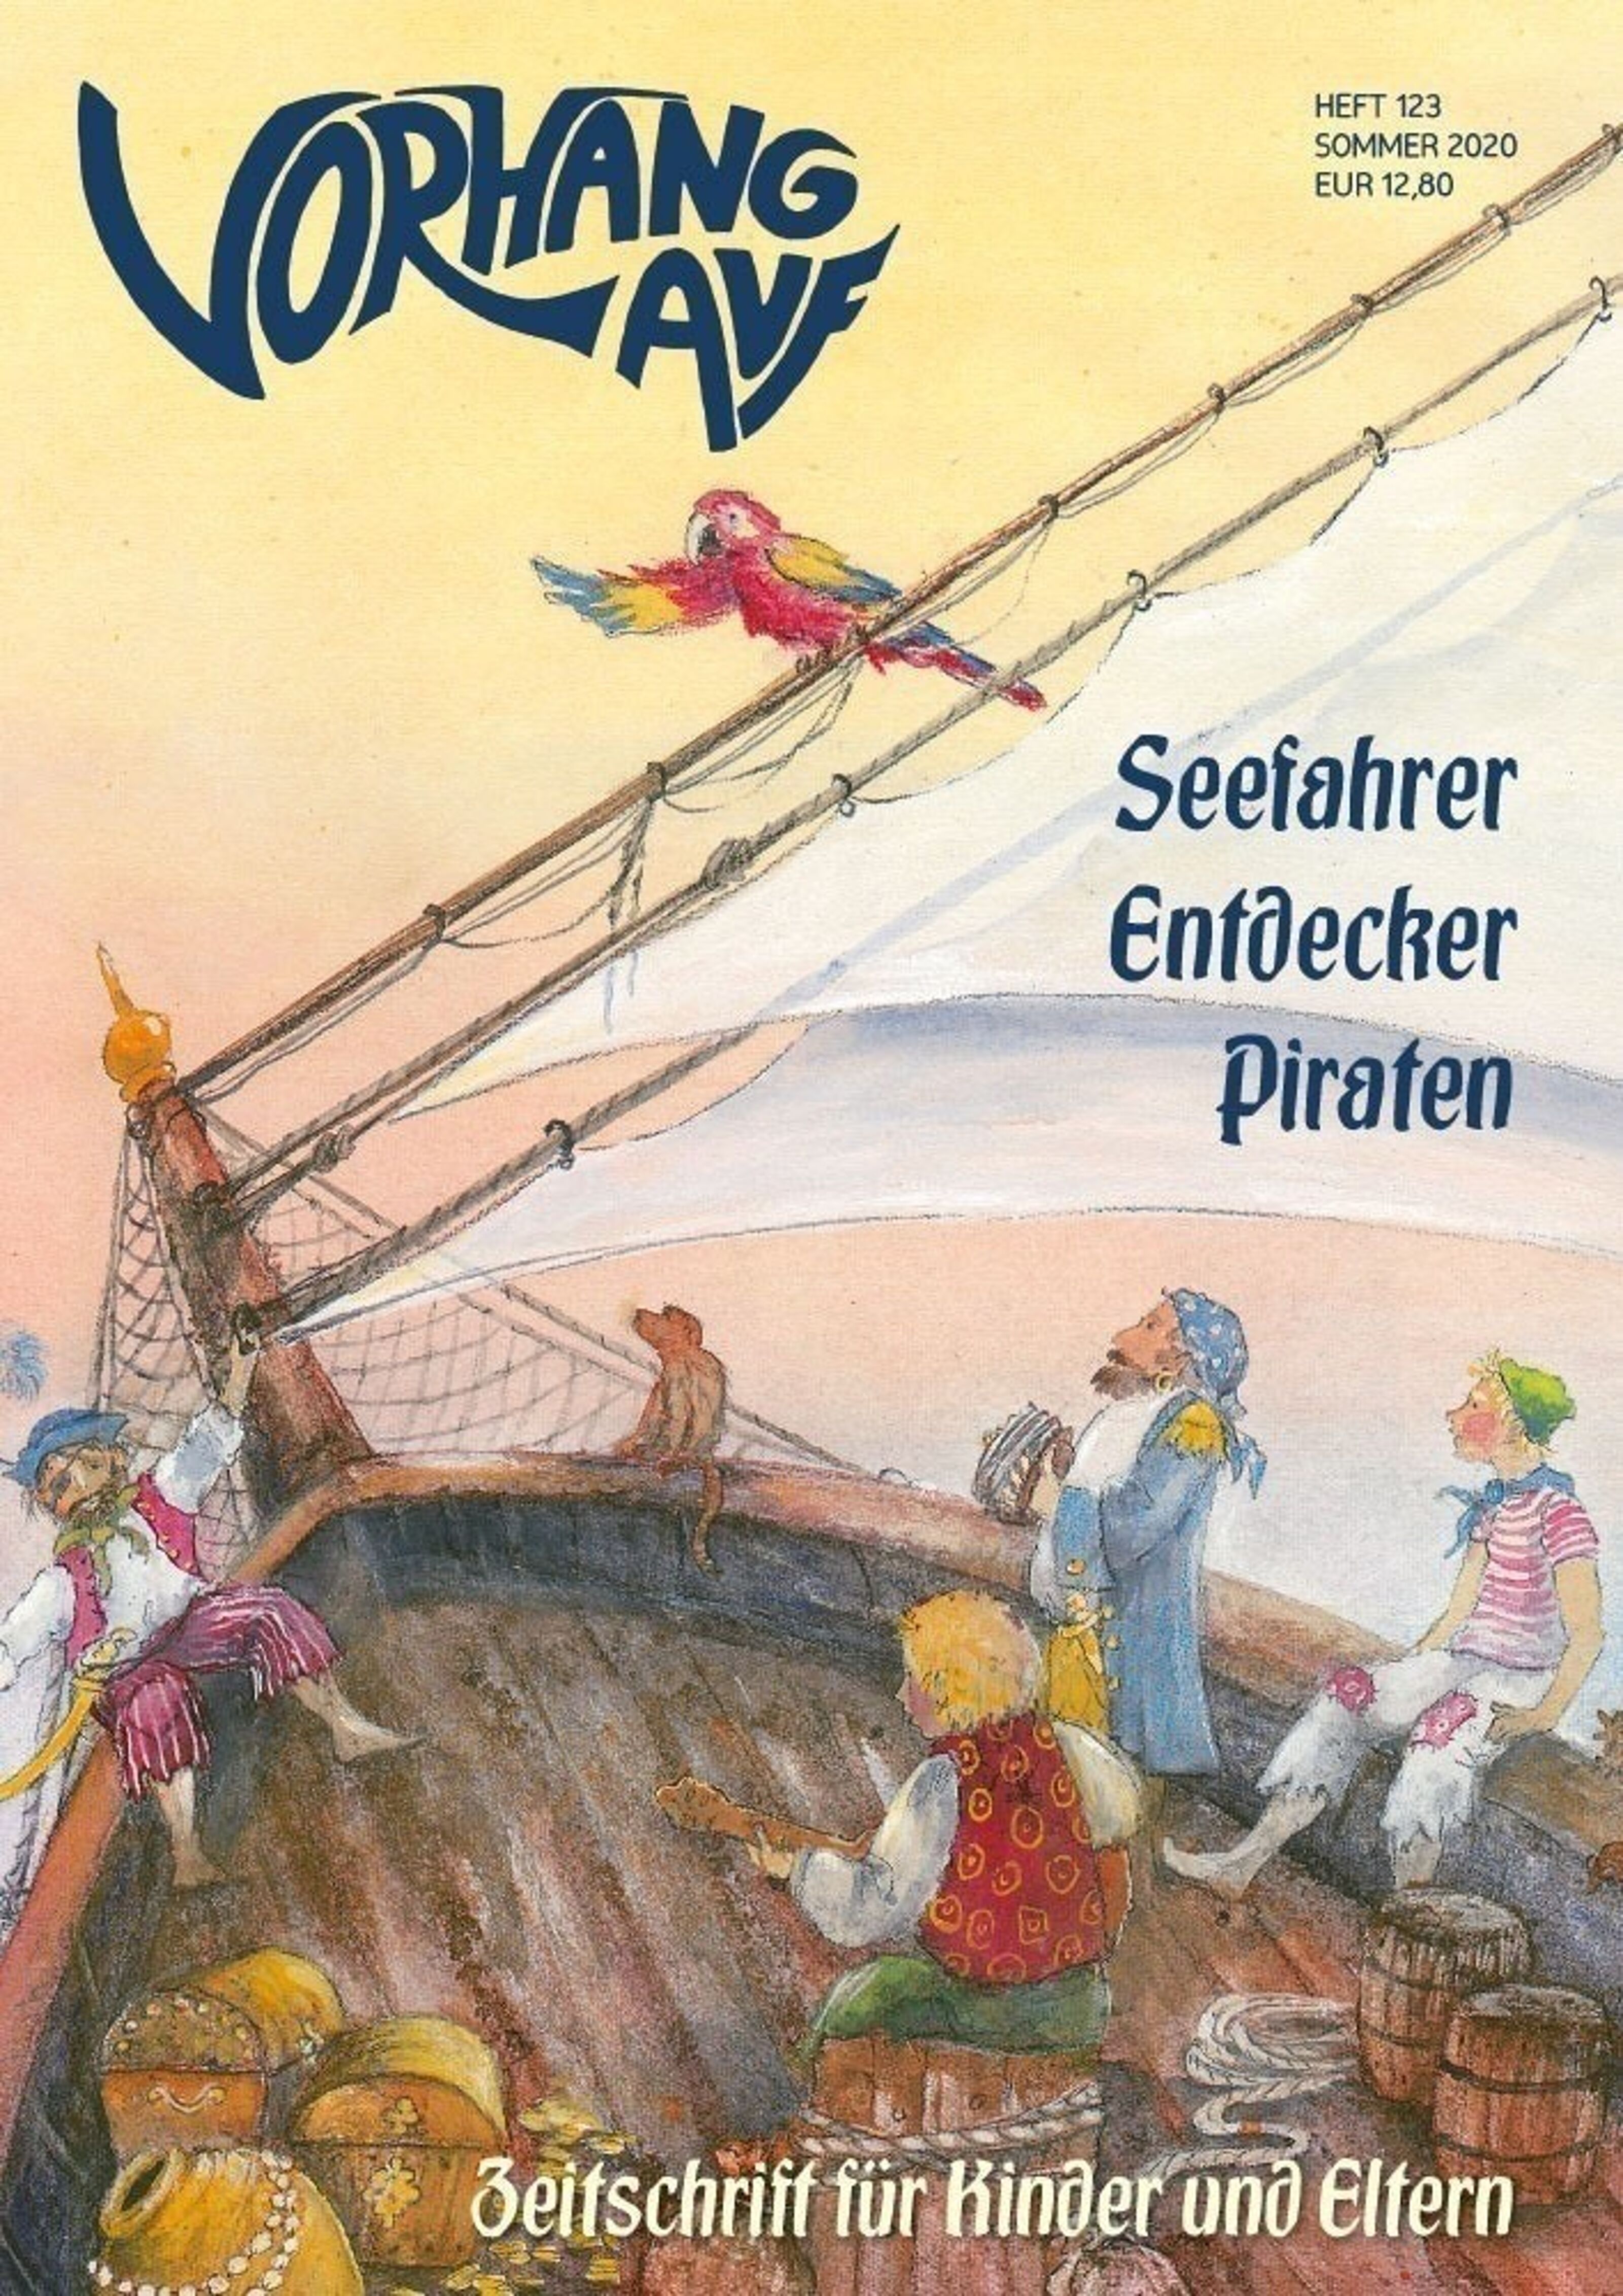 Buy wholesale CURTAIN explorers, booklet pirates 123 ON Seafarers